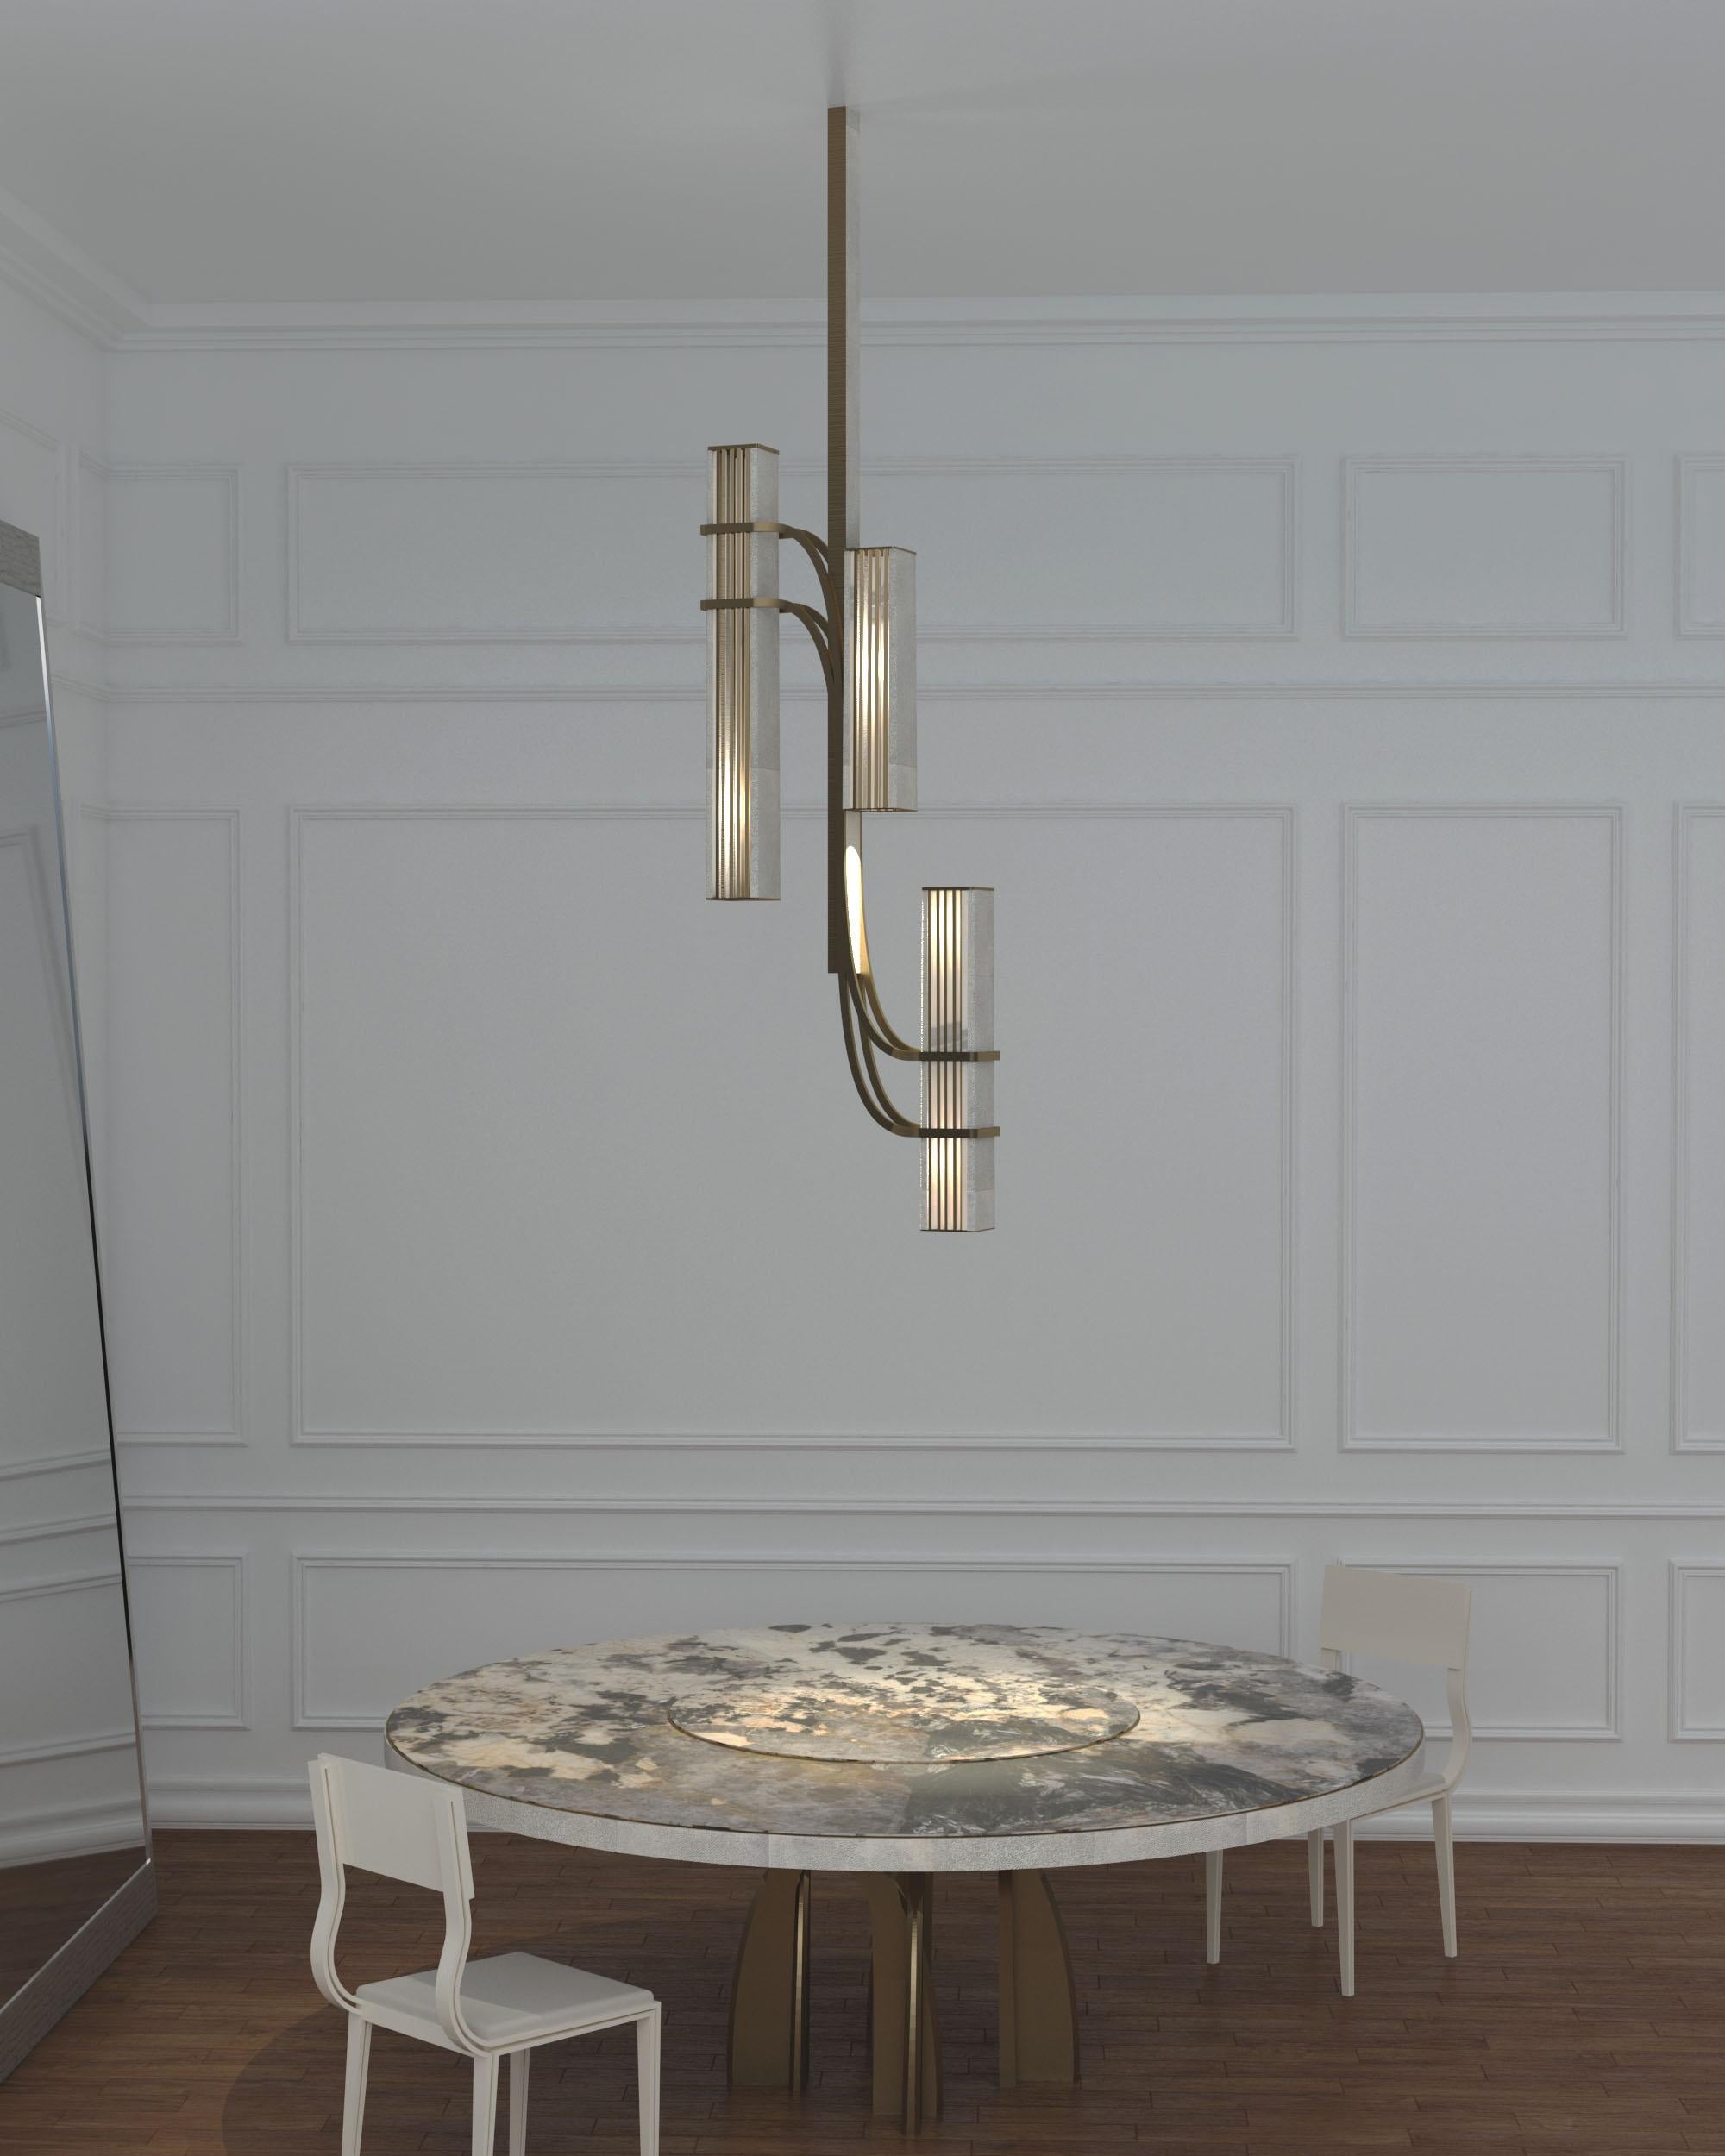 Patrick Coard Paris launches a unique and beautifully sculptural lighting collection inspired by music as a continuation of his candle line. The Rhapsody Cluster II Chandelier is an ethereal and sculptural piece. The metal or quartz slats are